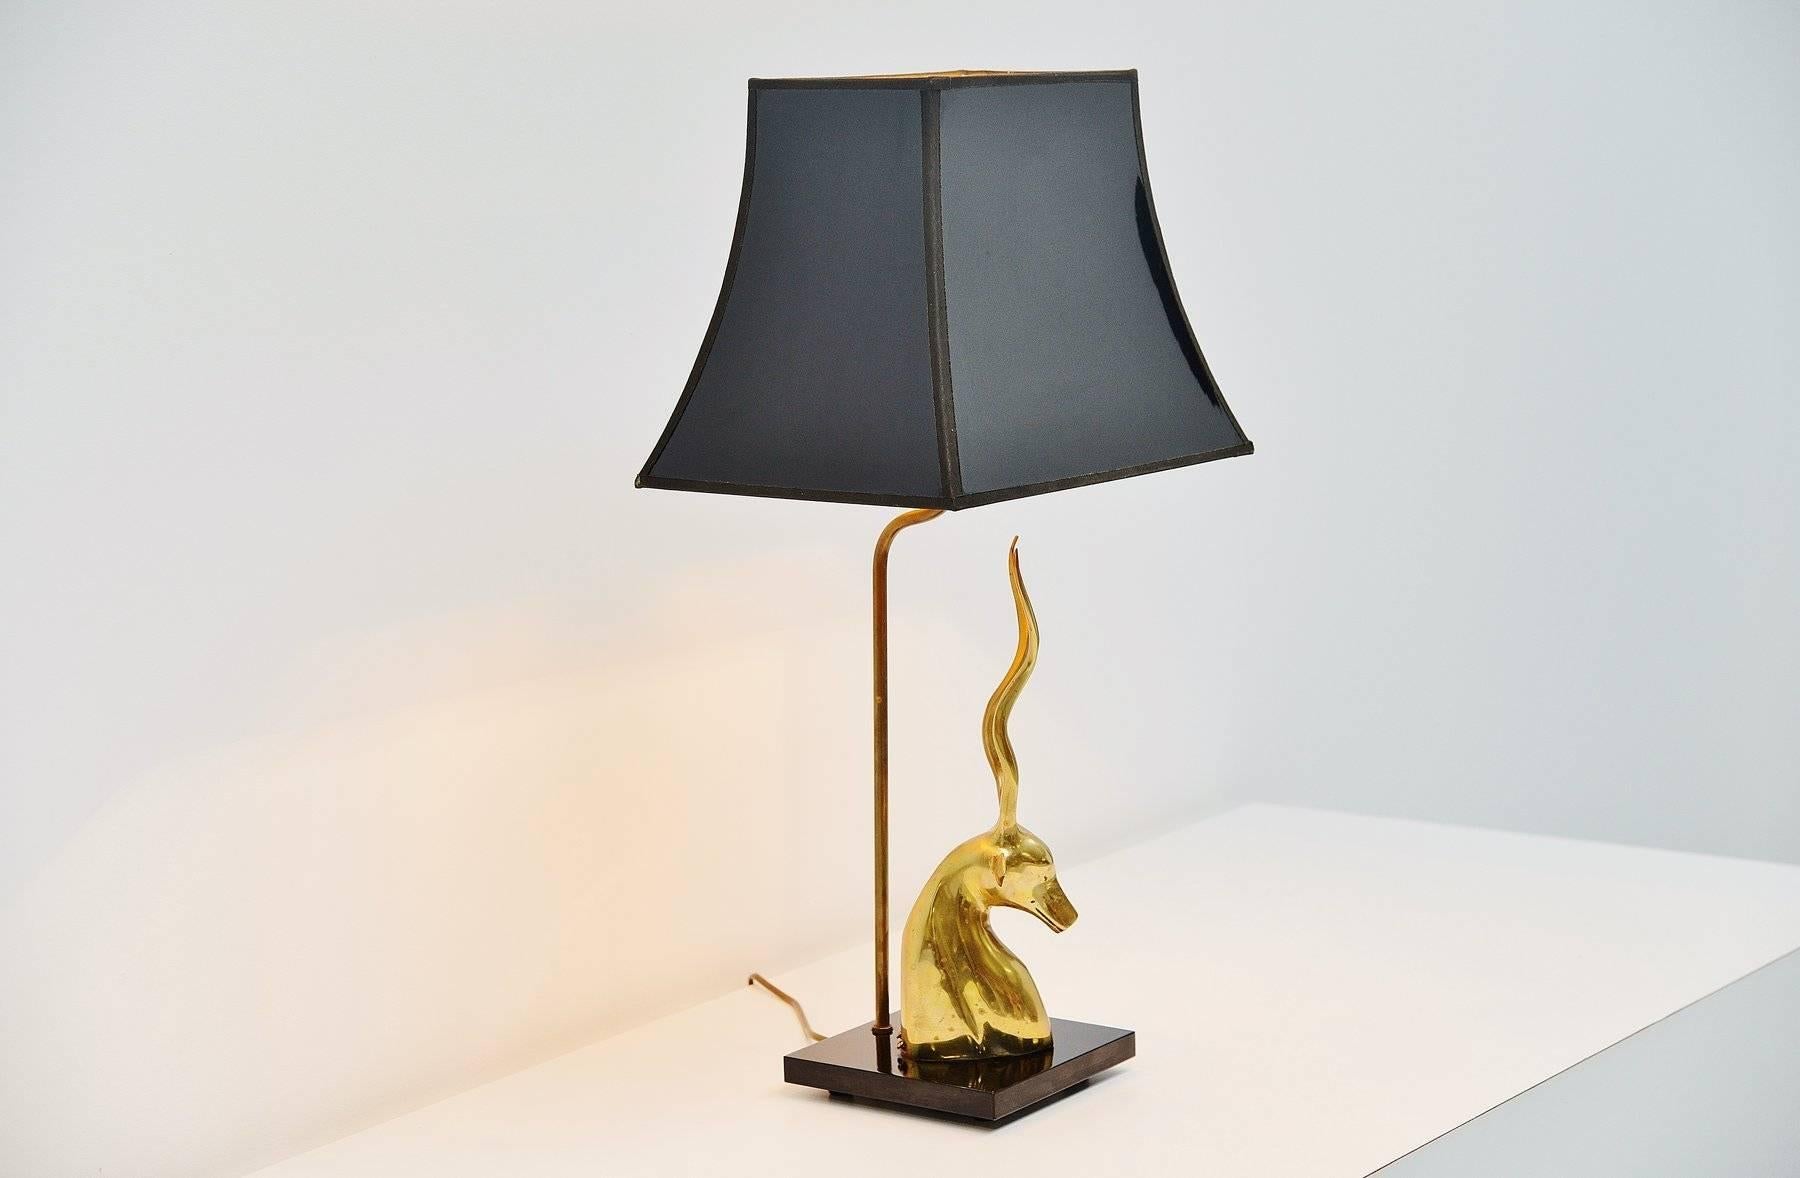 Lacquered Deer Head Table Lamp in Brass, France, 1975 For Sale